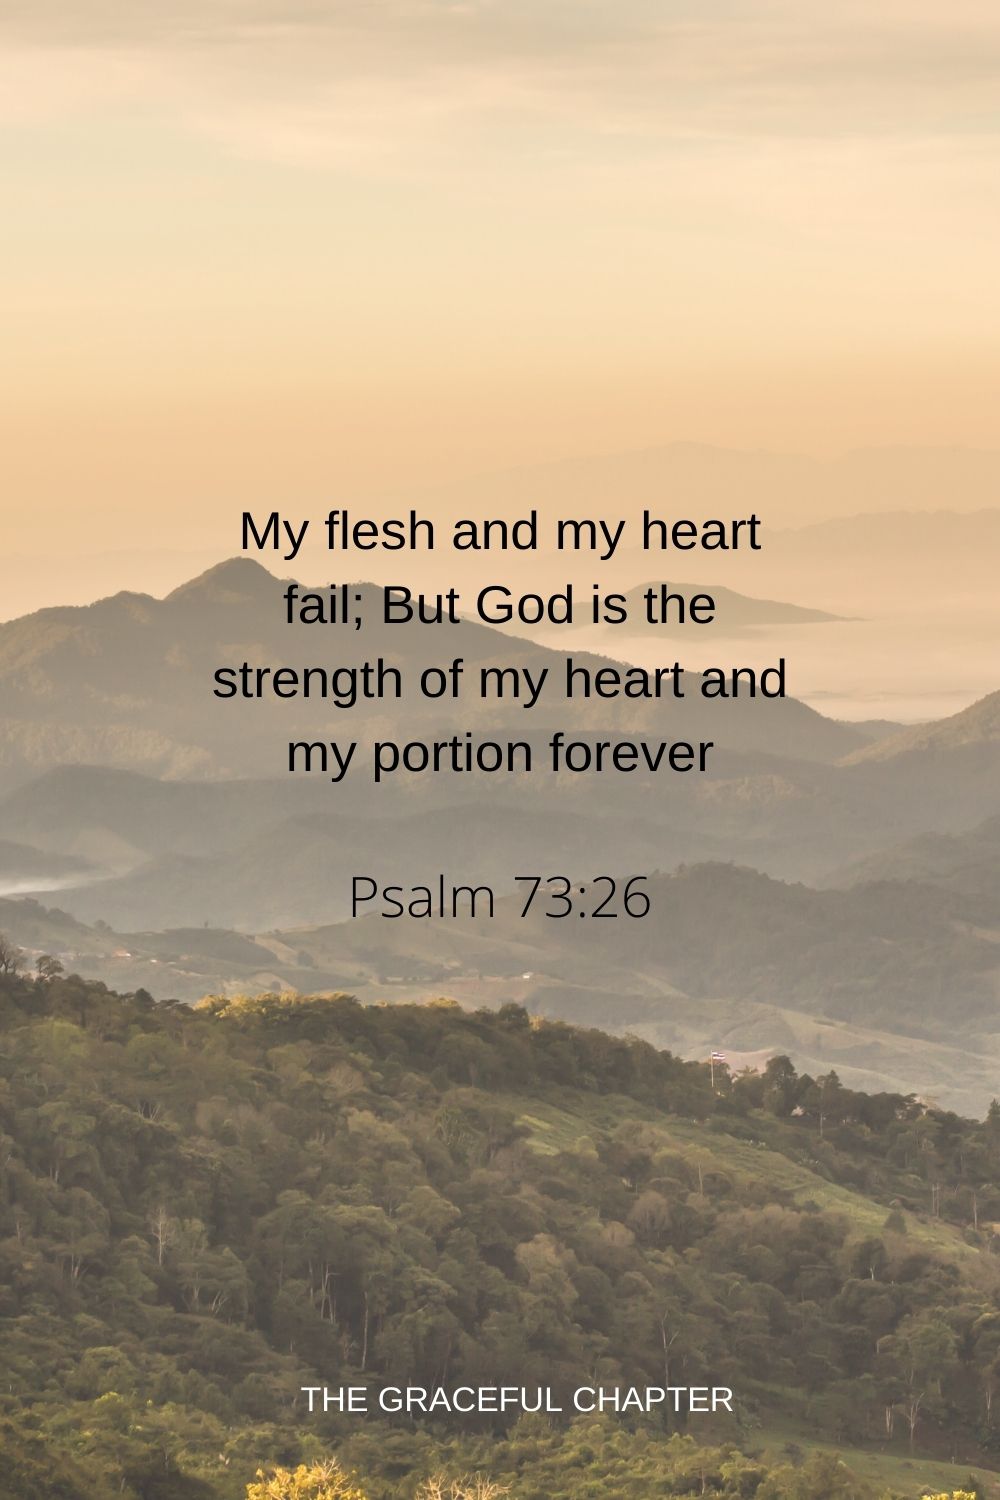 My flesh and my heart fail; But God is the strength of my heart and my portion forever. Psalm 73:26